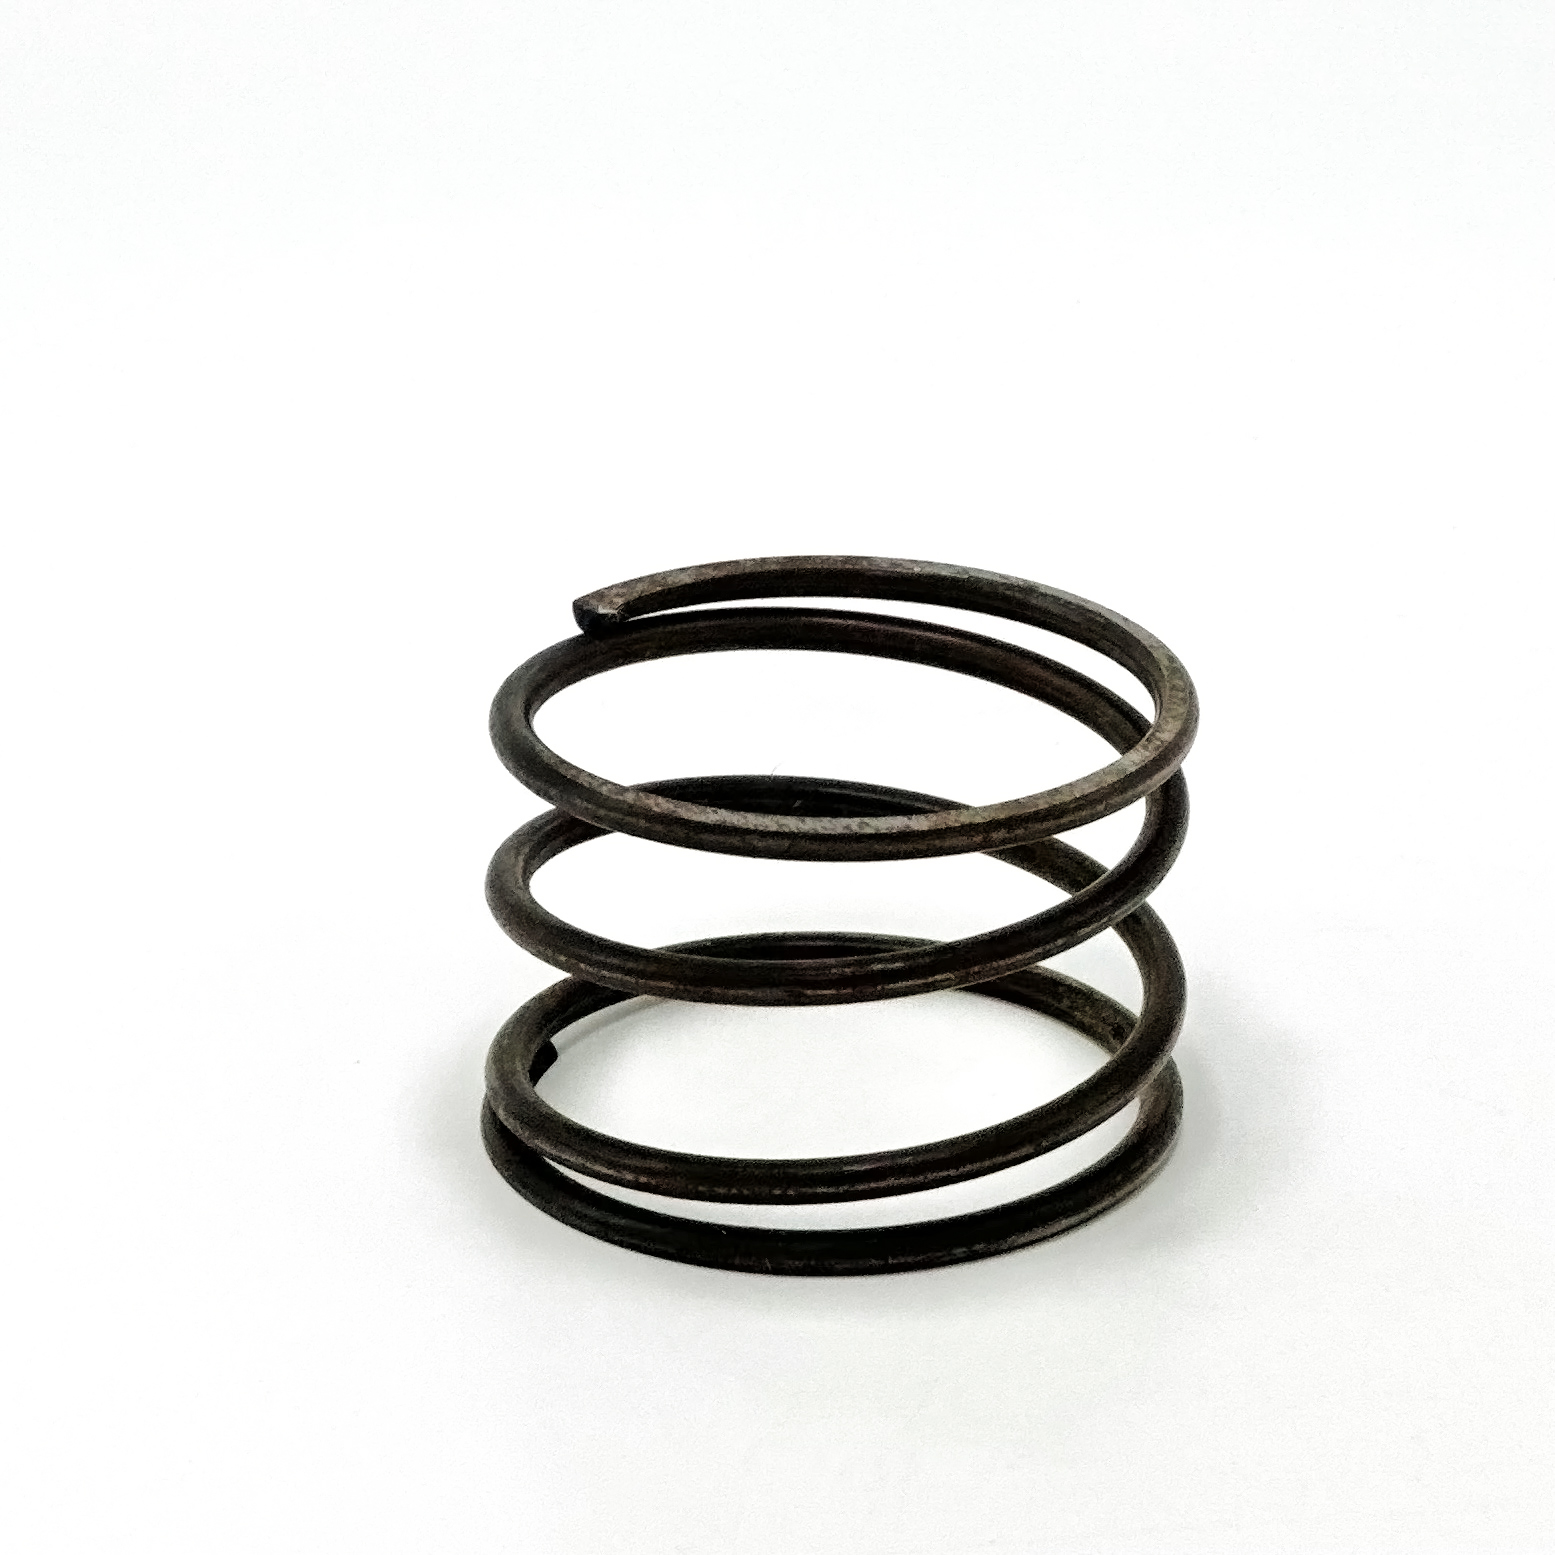 NHRK86900802 Clutch Spring - Replaces 86900802